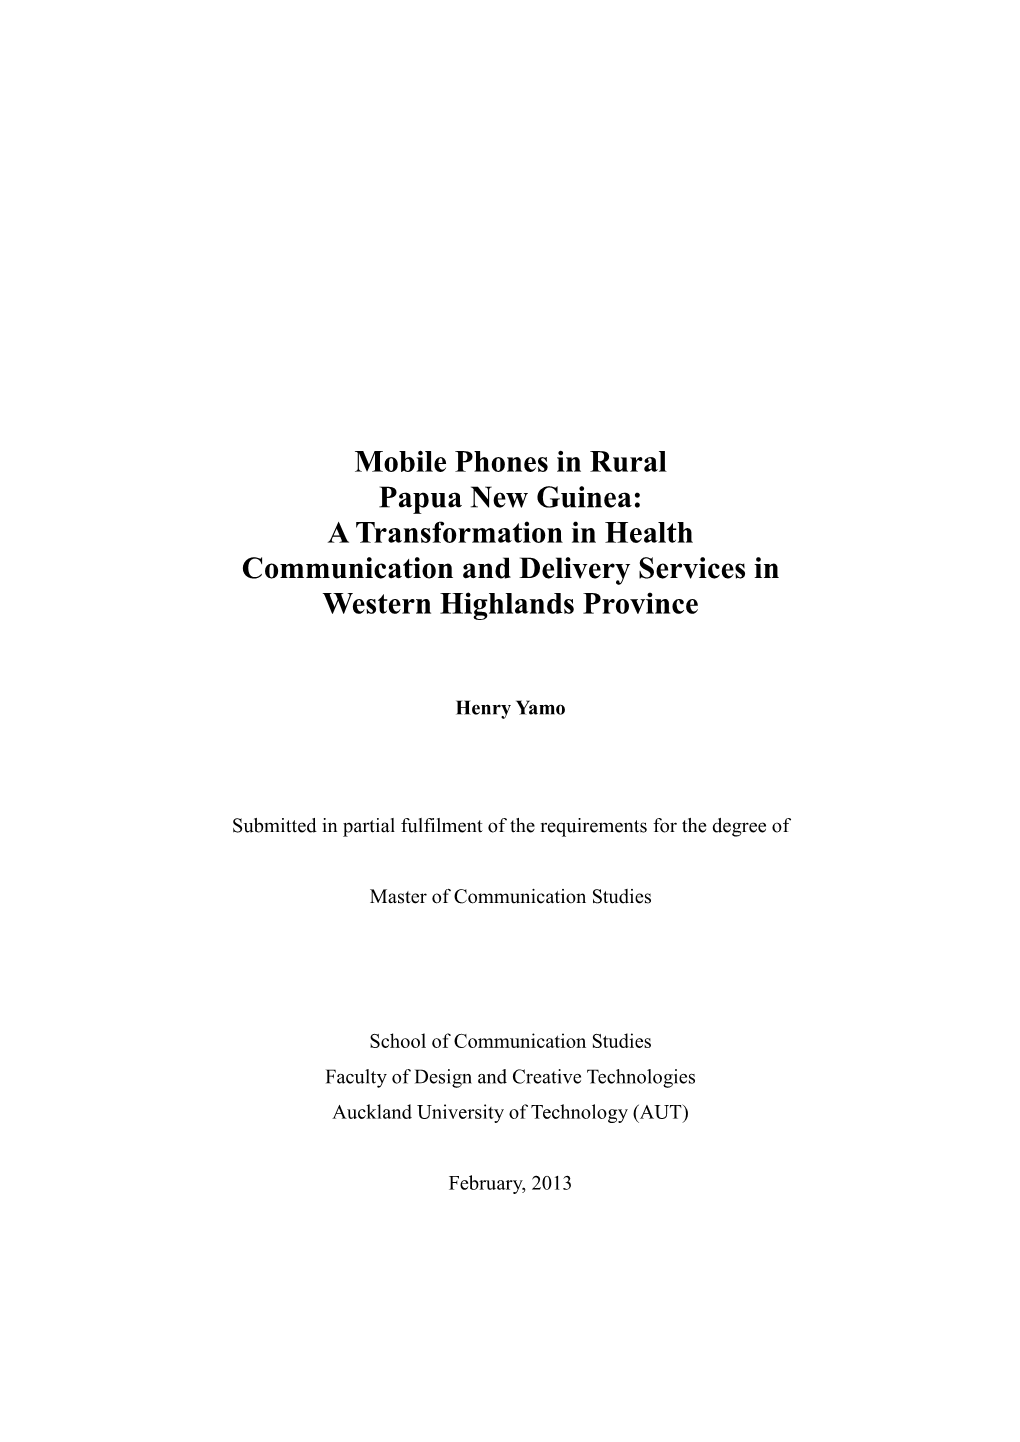 Mobile Phones in Rural Papua New Guinea: a Transformation in Health Communication and Delivery Services in Western Highlands Province